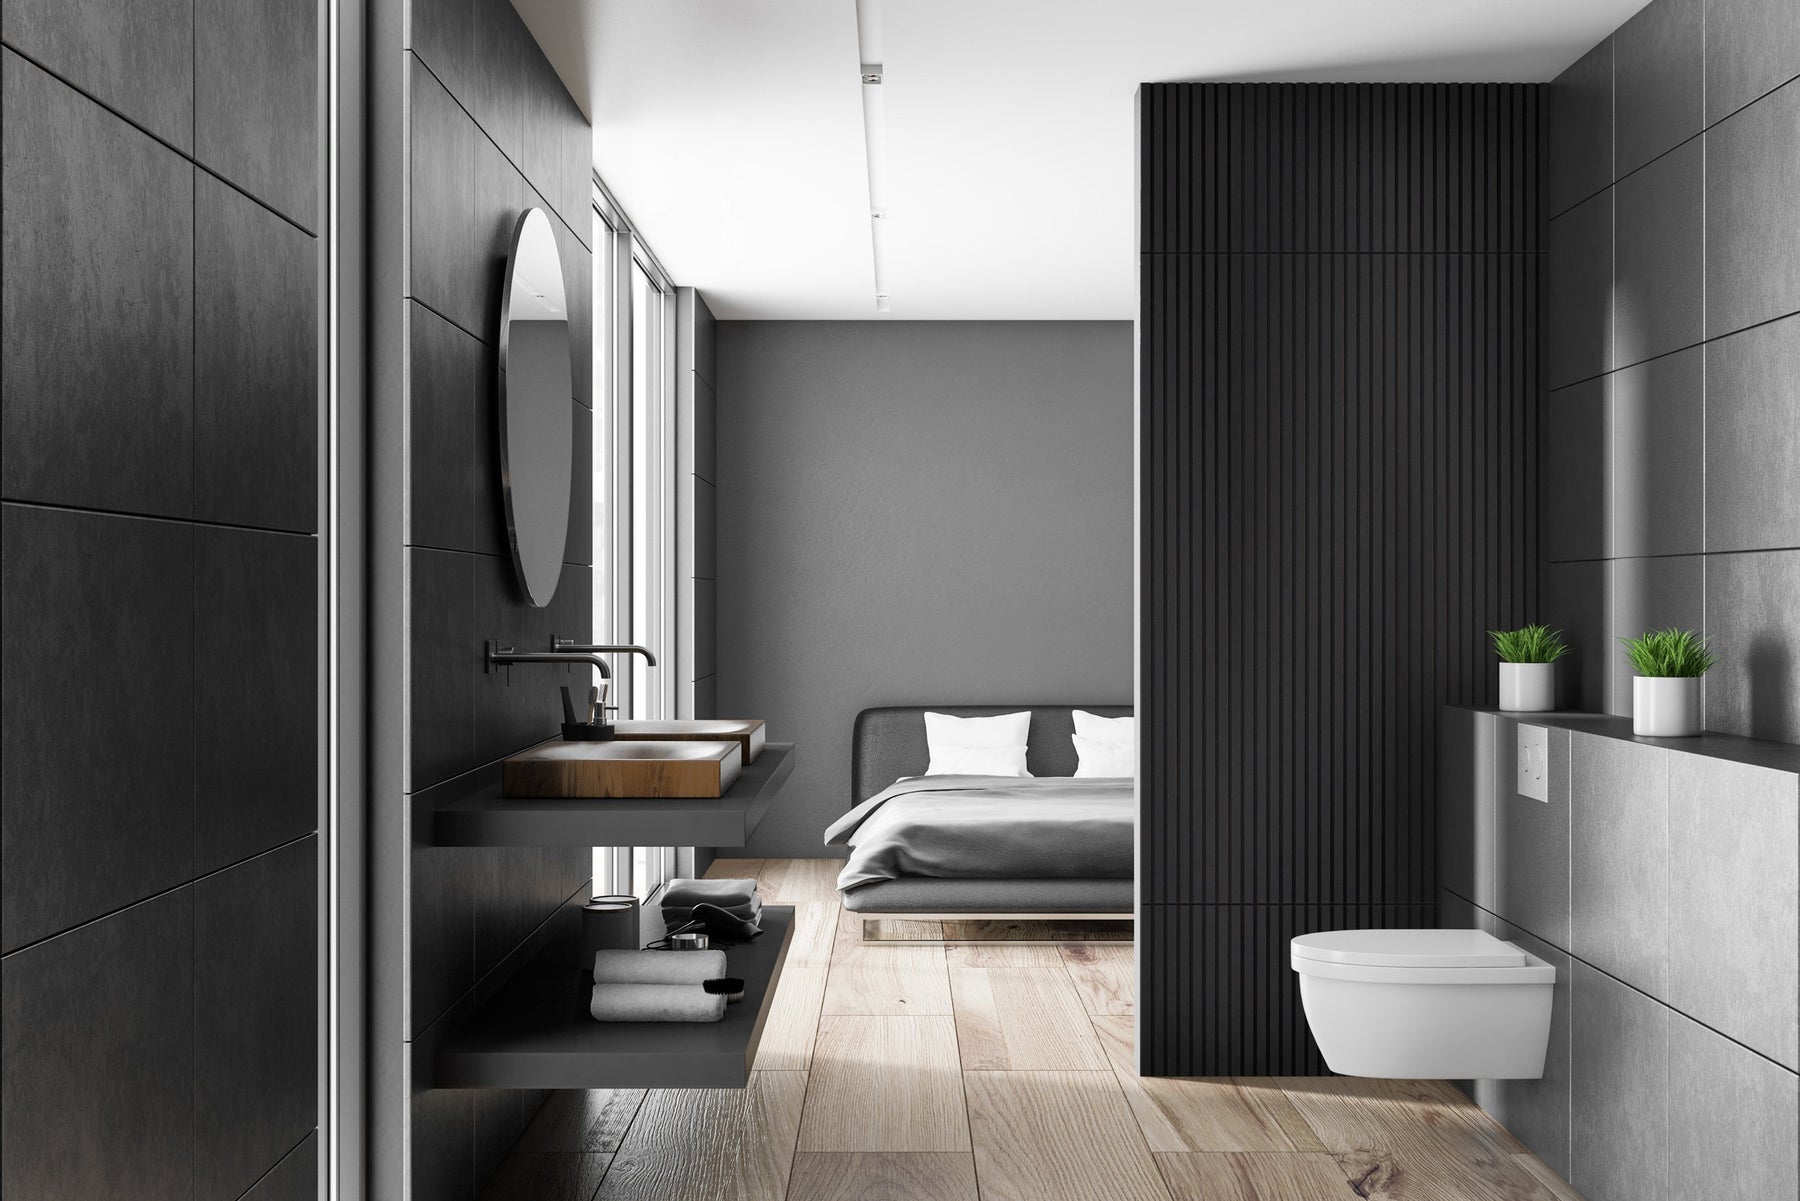 Wall panelling ideas for bathrooms using wood!